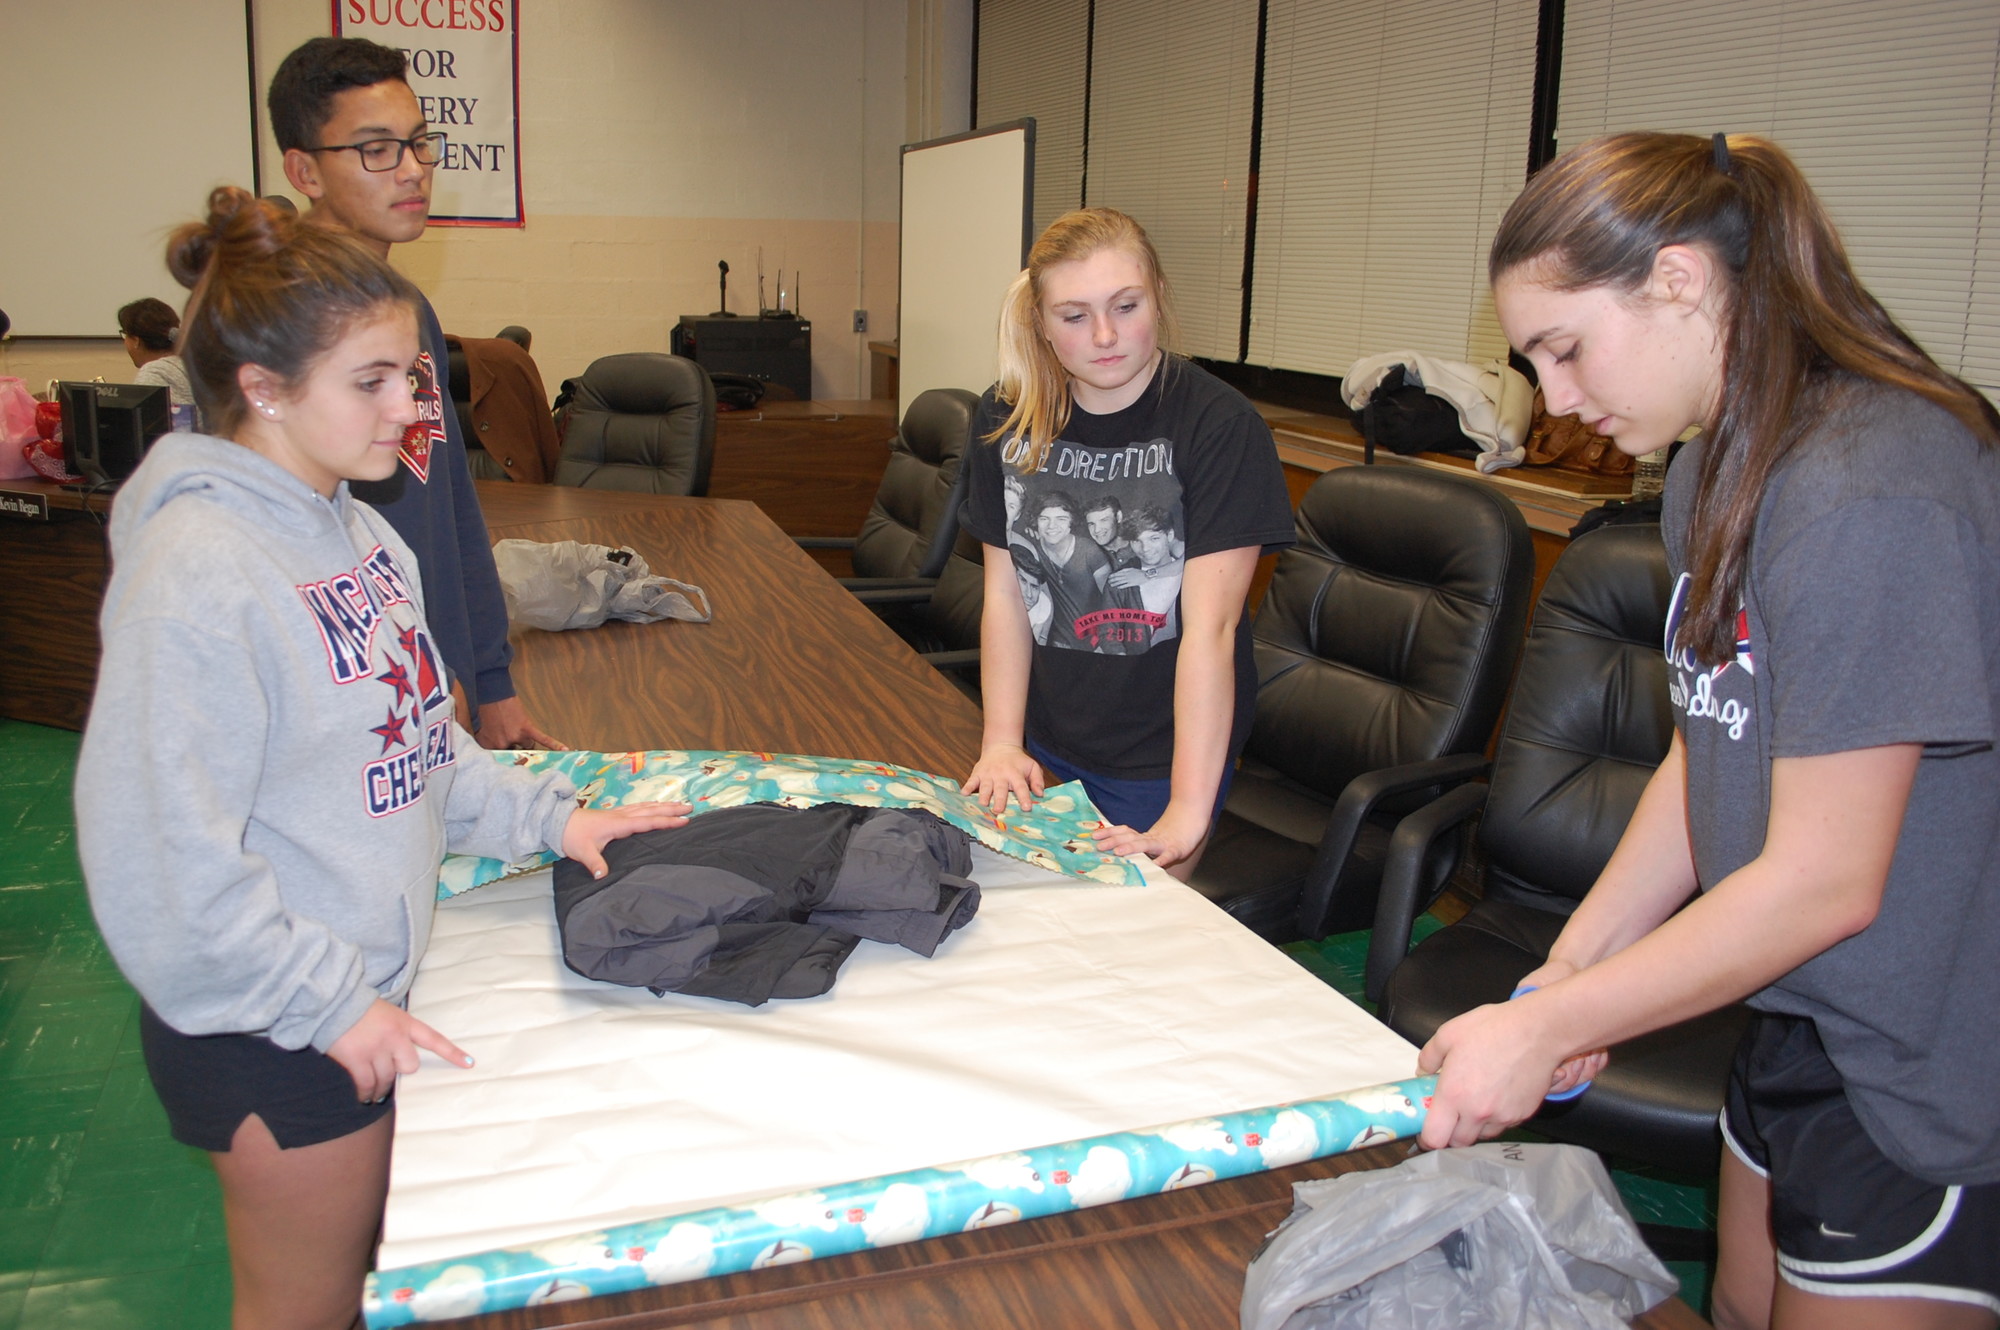 MacArthur High School cheerleaders, from left, Jacqueline Langellotti, Elias Martinez, Stephanie Schwartz and Danielle Zangrillo wrapped a winter coat for a local needy child on Dec. 16 at the Levittown Memorial Education Center.